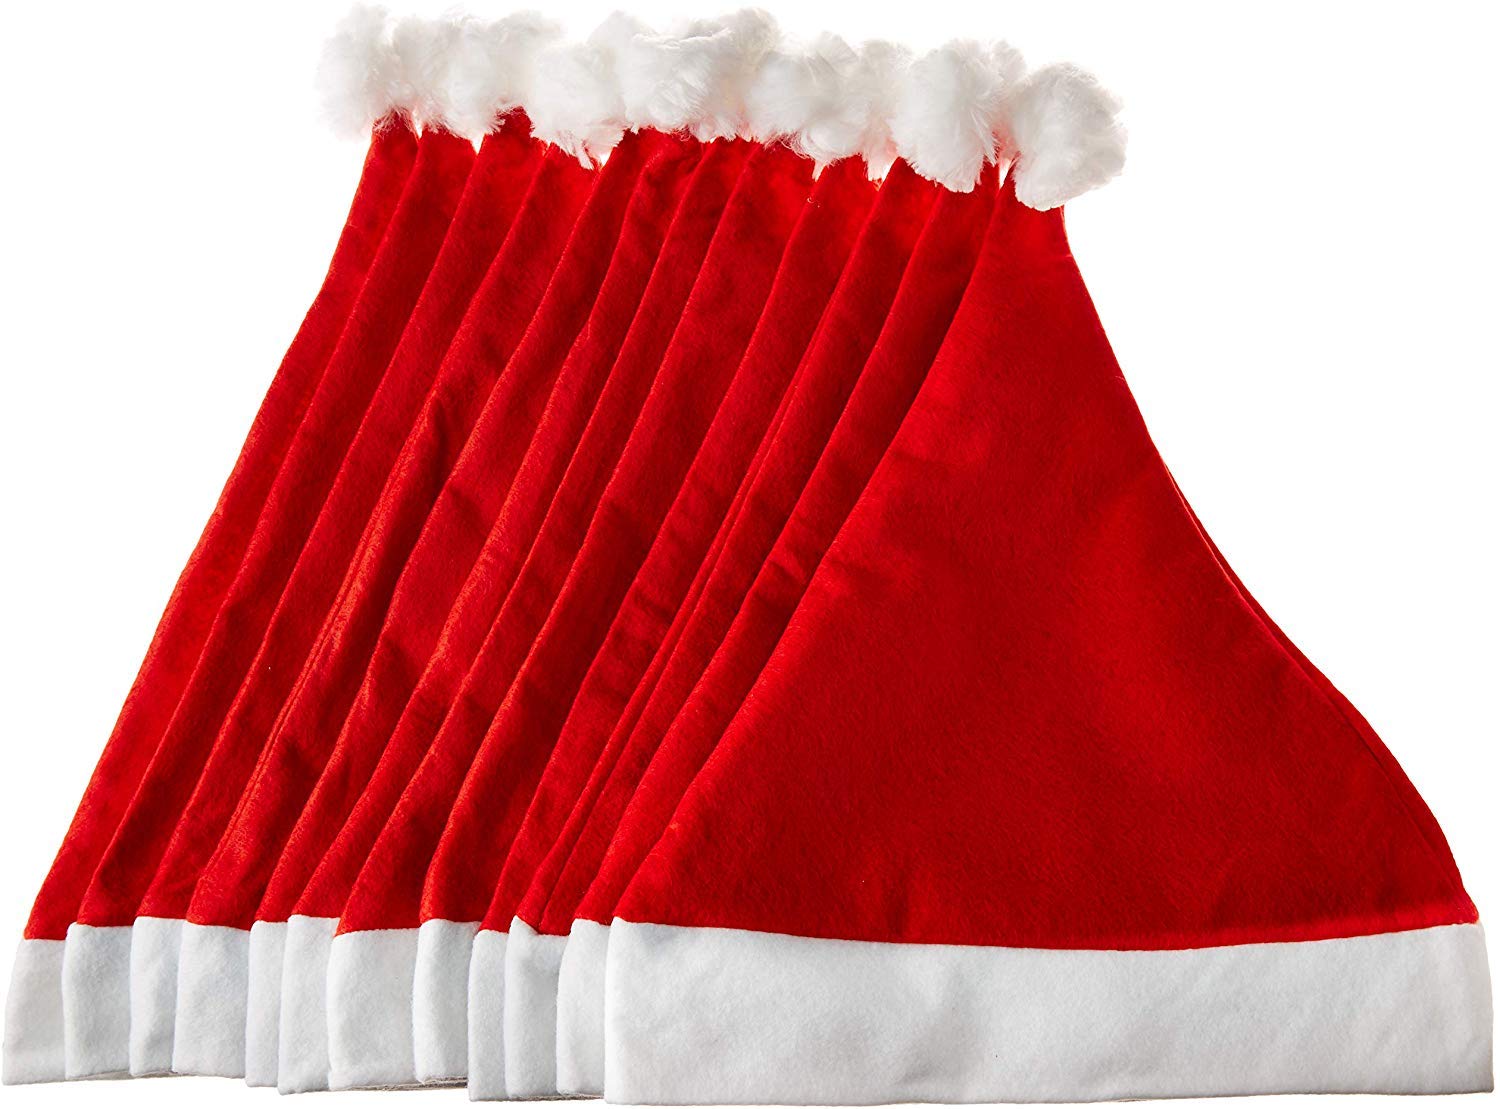 eCraftIndia Red and White Merry Christmas Hats, Santa Claus Caps for kids and Adults - Free Size XMAS Caps, Santa Claus Hats for Christmas, New Year, Festive Holiday Party (Set of 6) 4